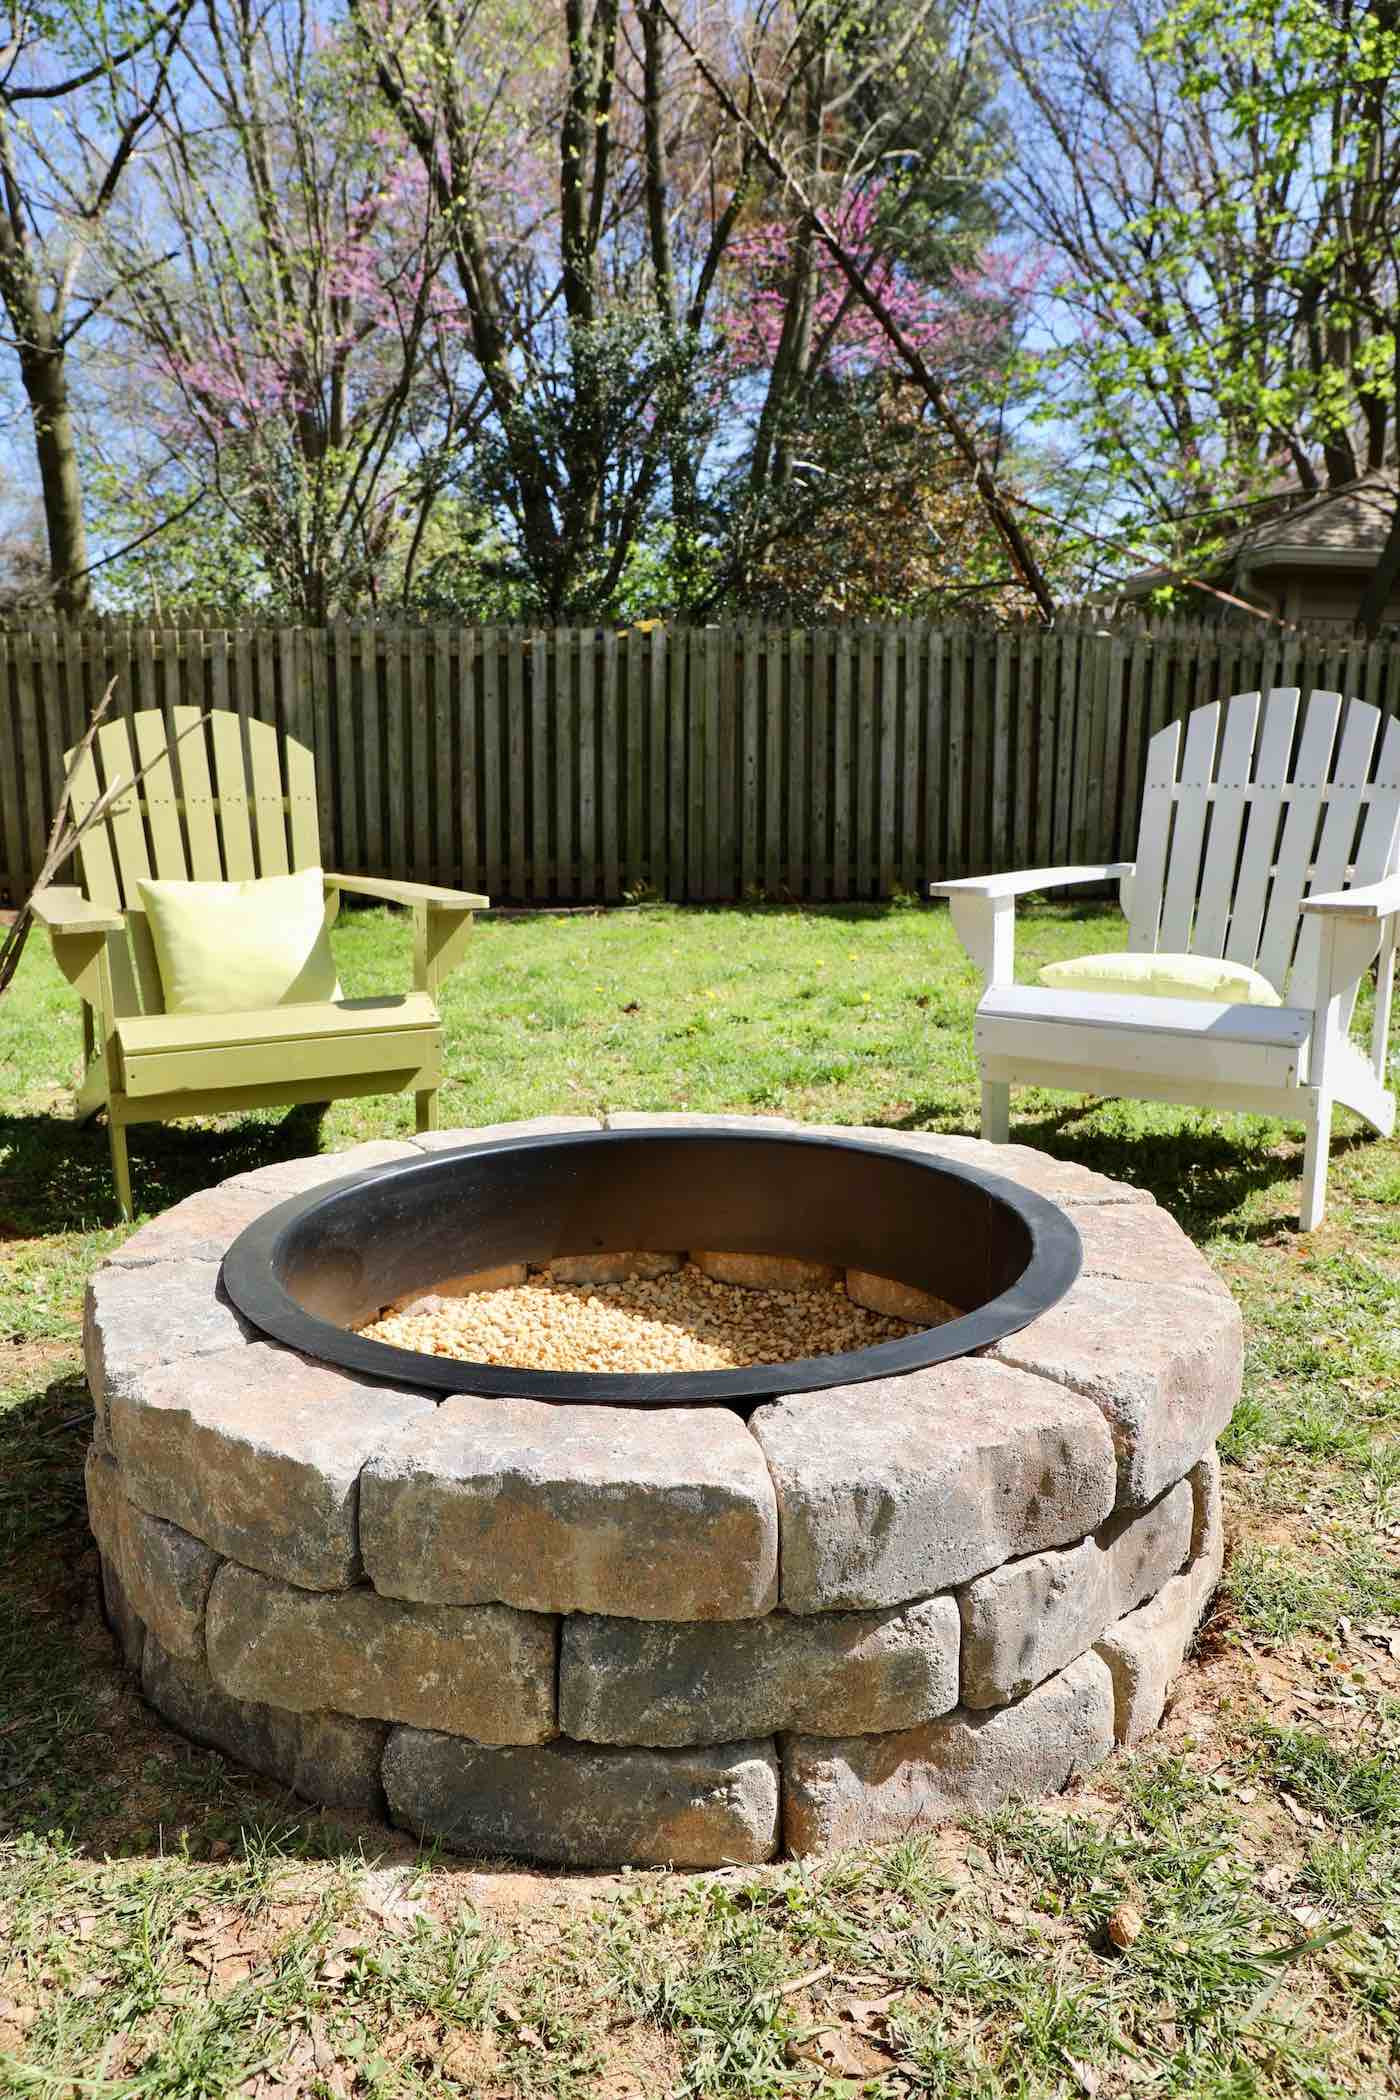 Backyard Fire Pit Kit
 How to Build a Fire Pit in Your Backyard I Used a Fire